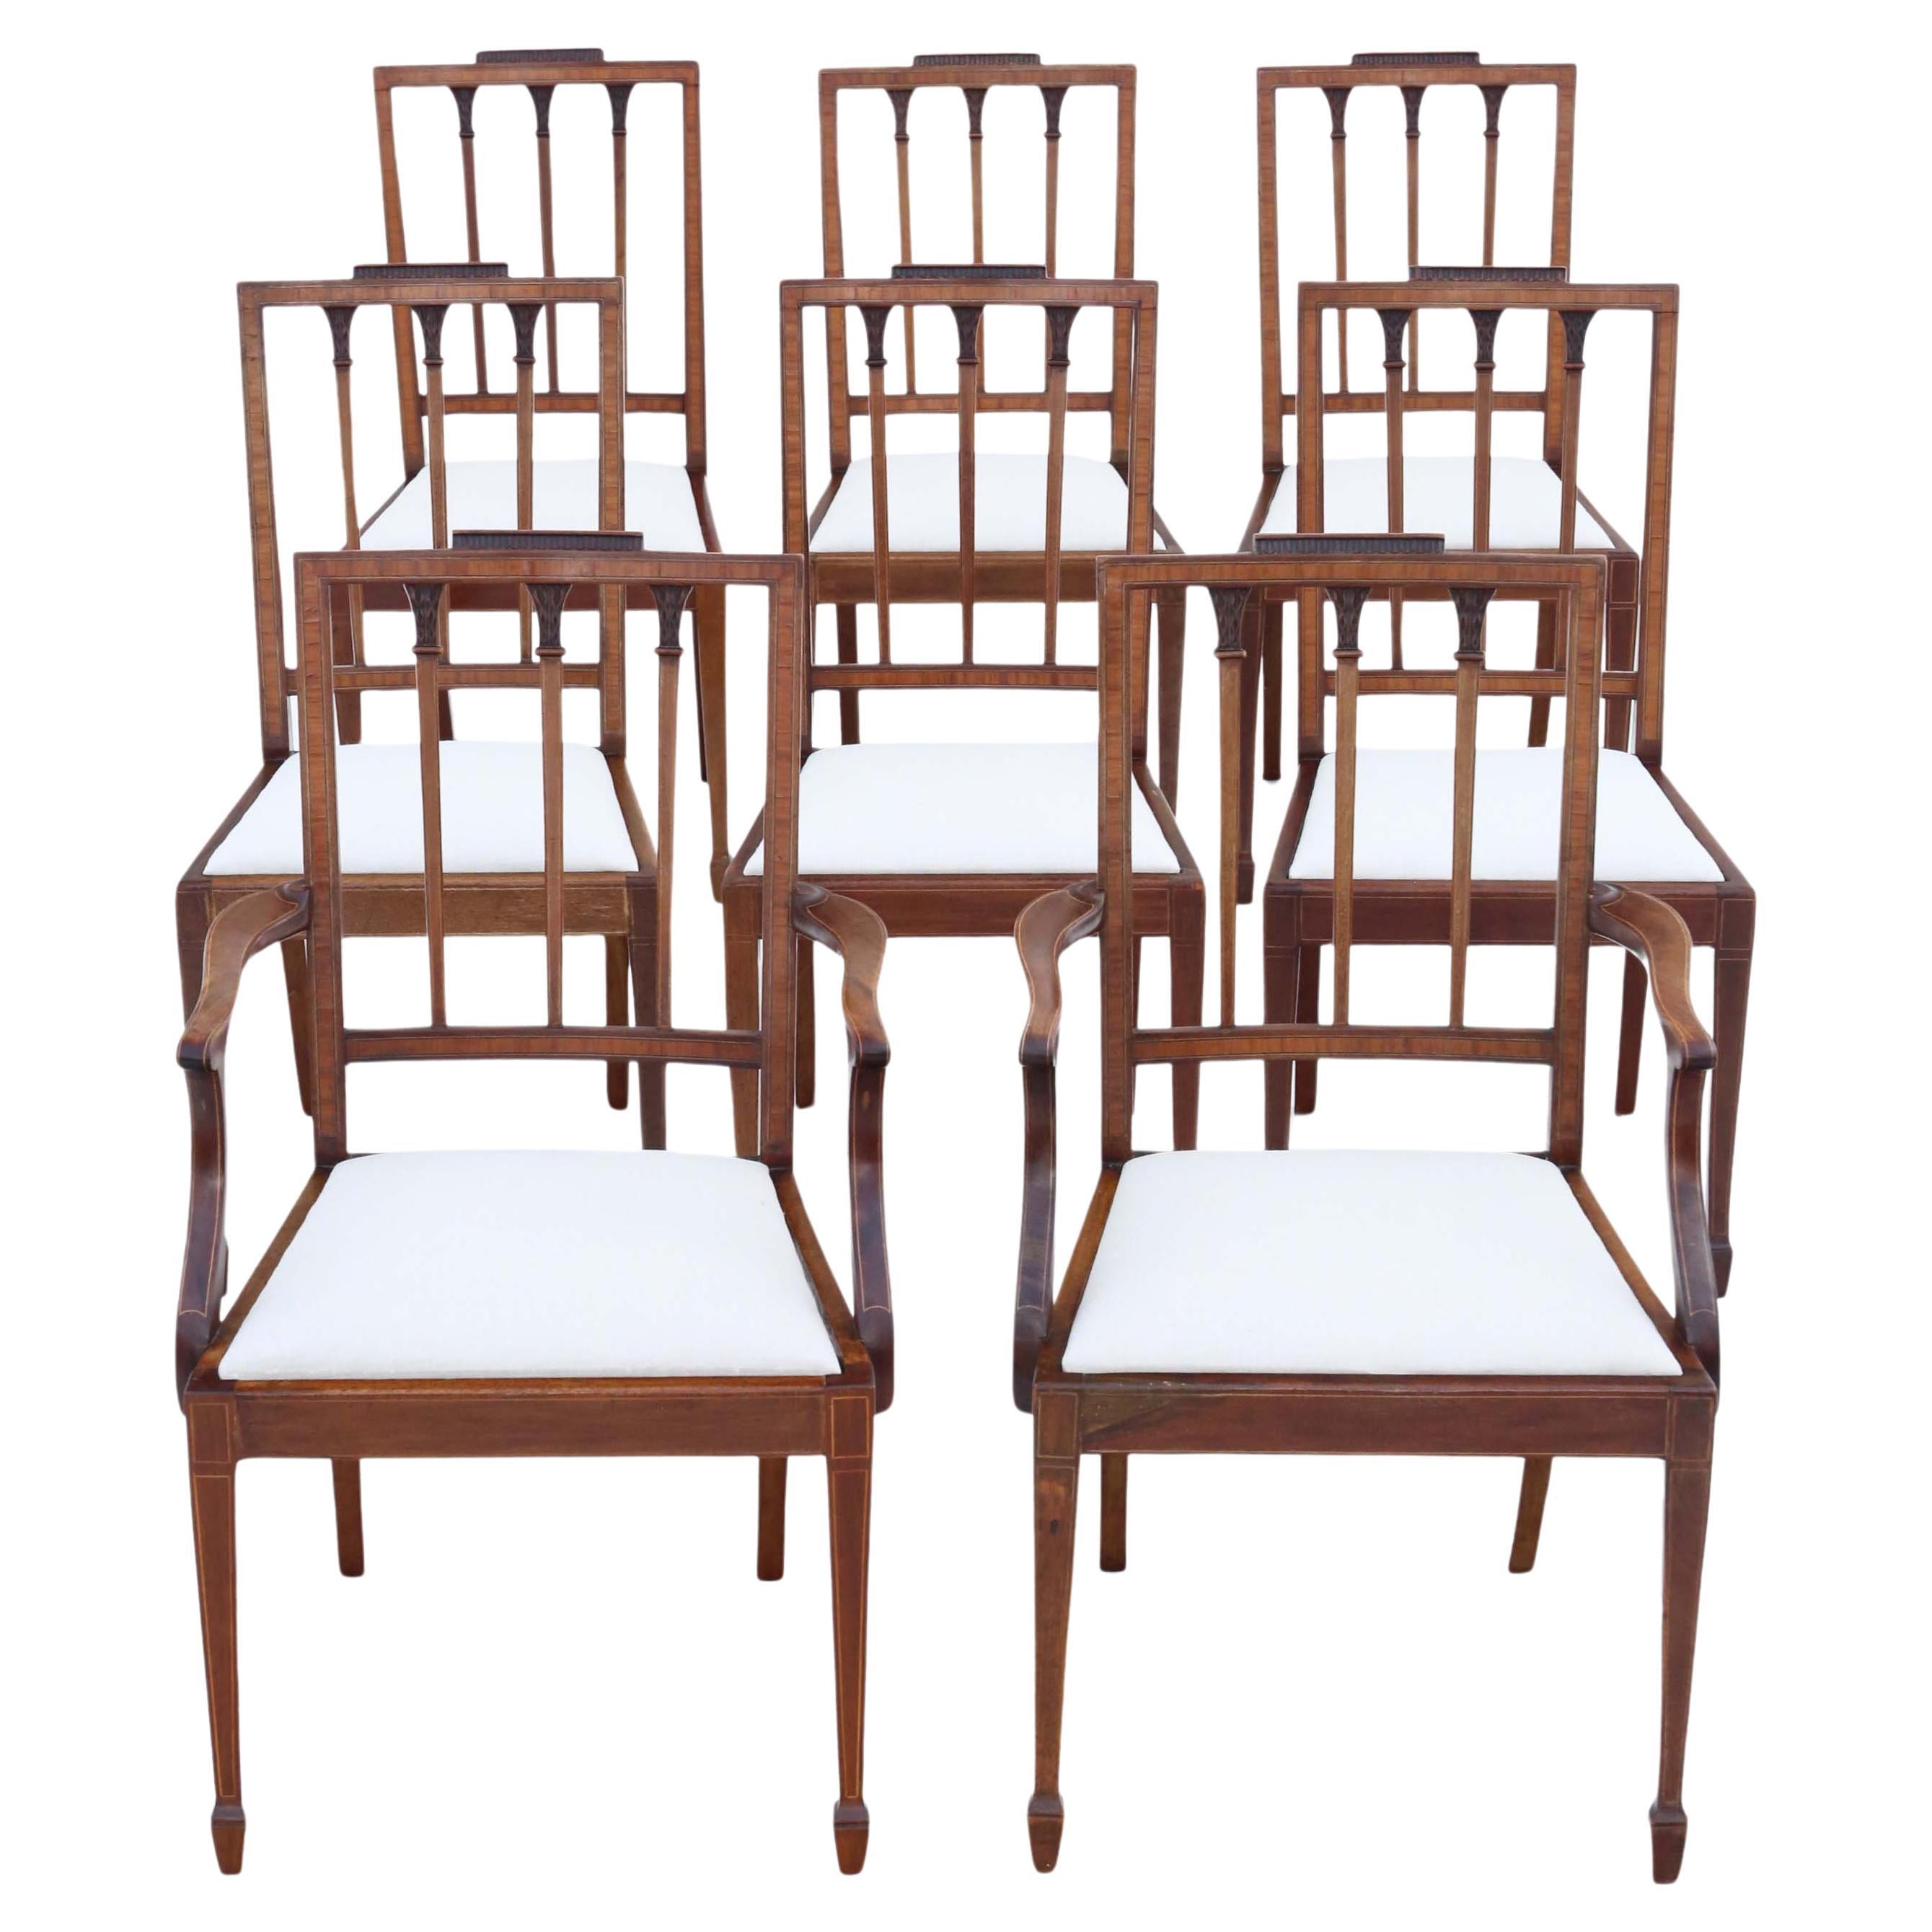 Georgian Revival Mahogany Dining Chairs: Set of 8 (6 + 2), Antique Quality, C190